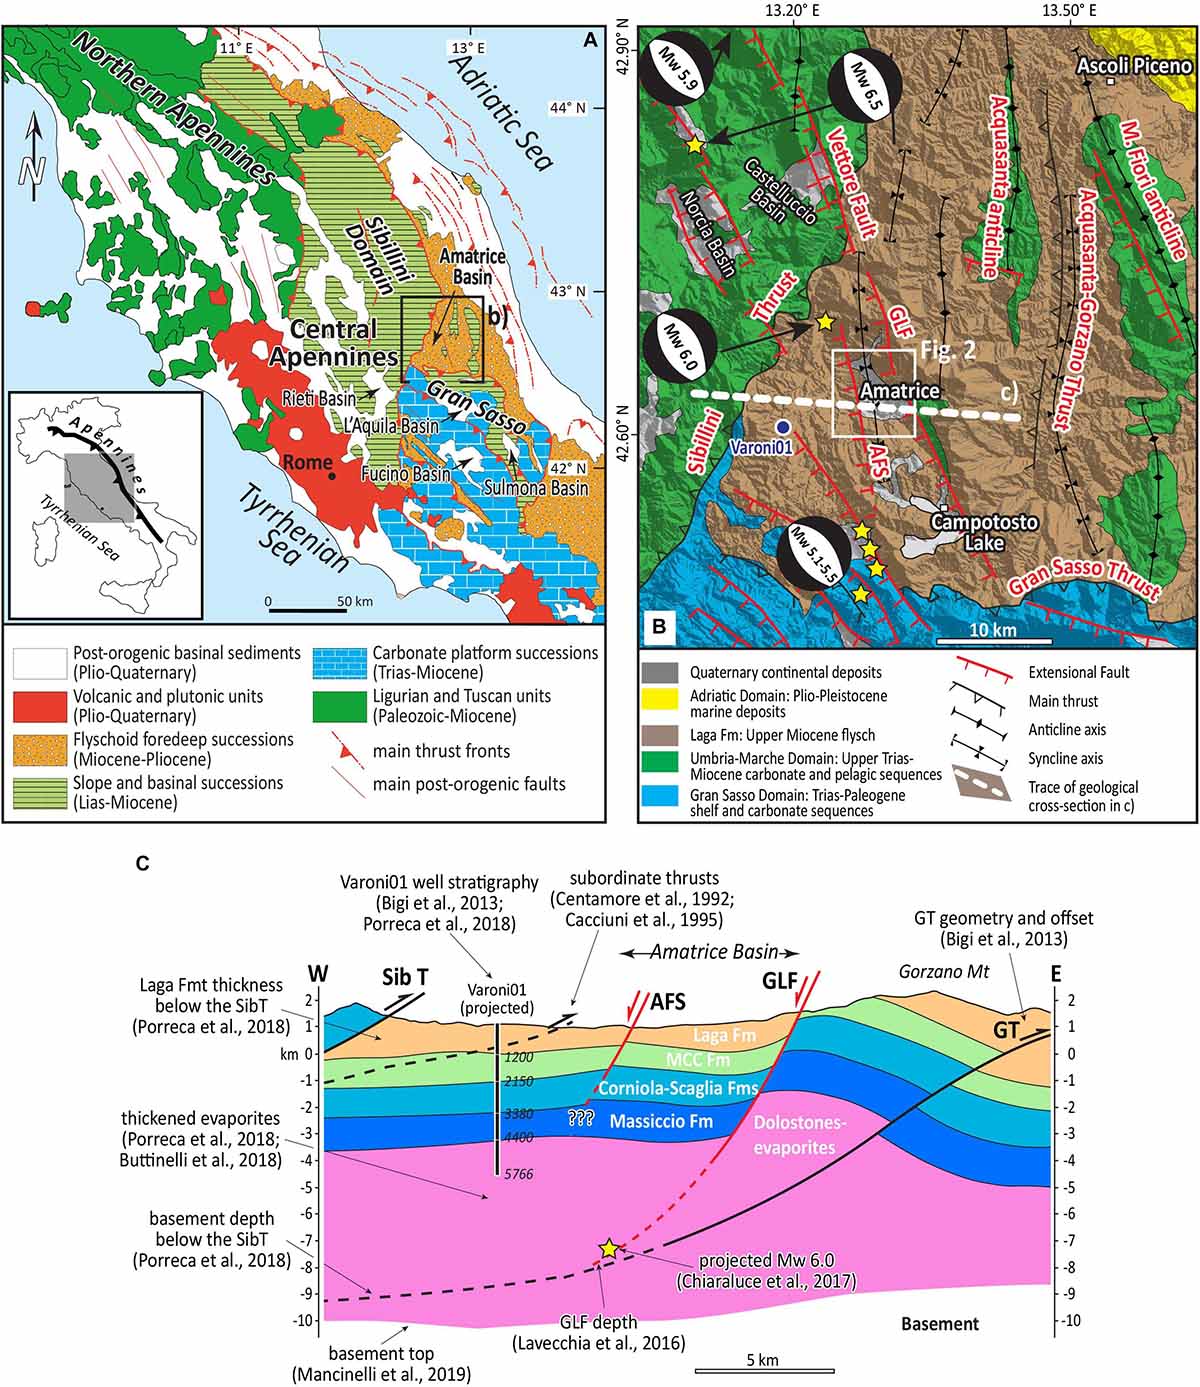 Frontiers Spatial Temporal Evolution Of Extensional Faulting And Fluid Circulation In The Amatrice Basin Central Apennines Italy During The Pleistocene Earth Science